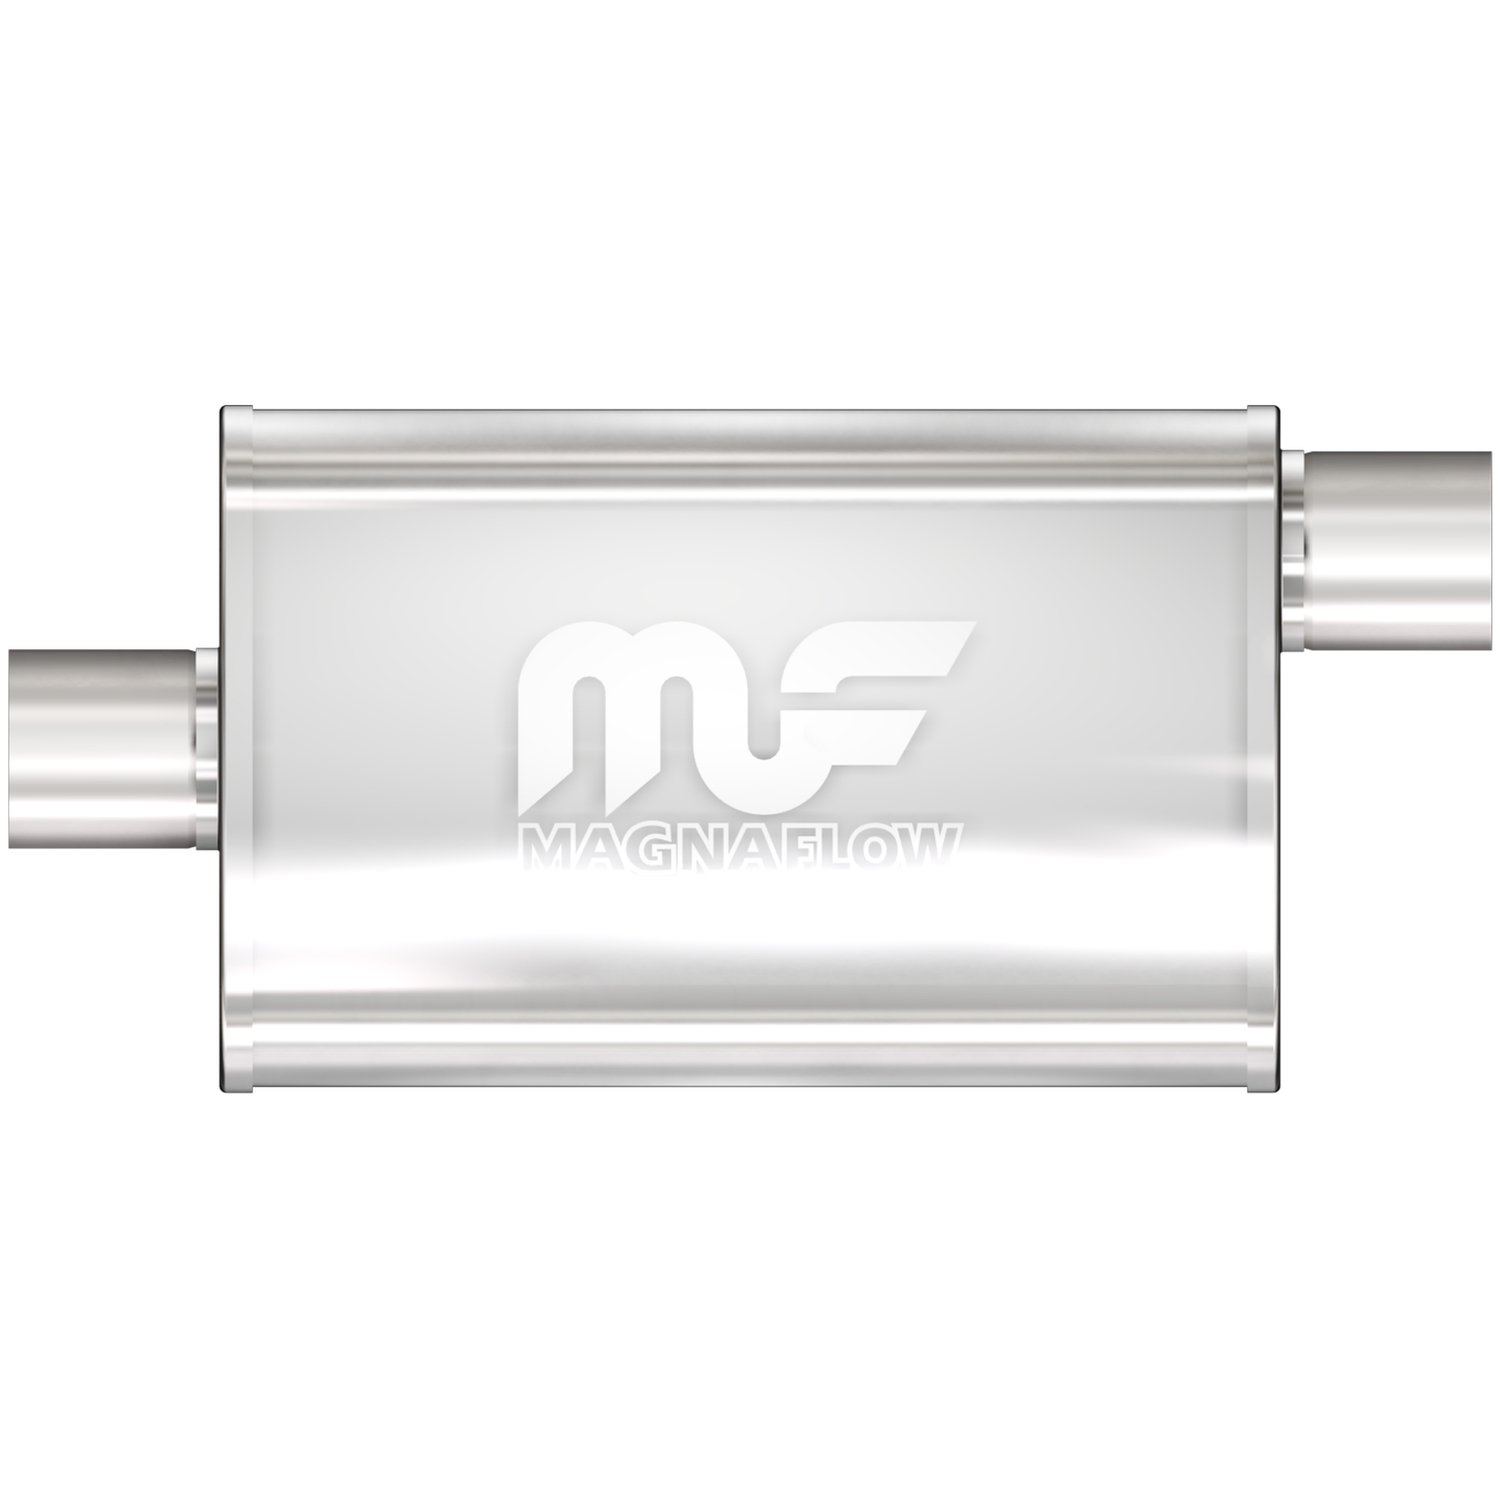 3.5" x 7" Oval Muffler Offset In/Center Out: 2" Body Length: 14" Overall Length: 20" Core Size: 2" Satin Finish